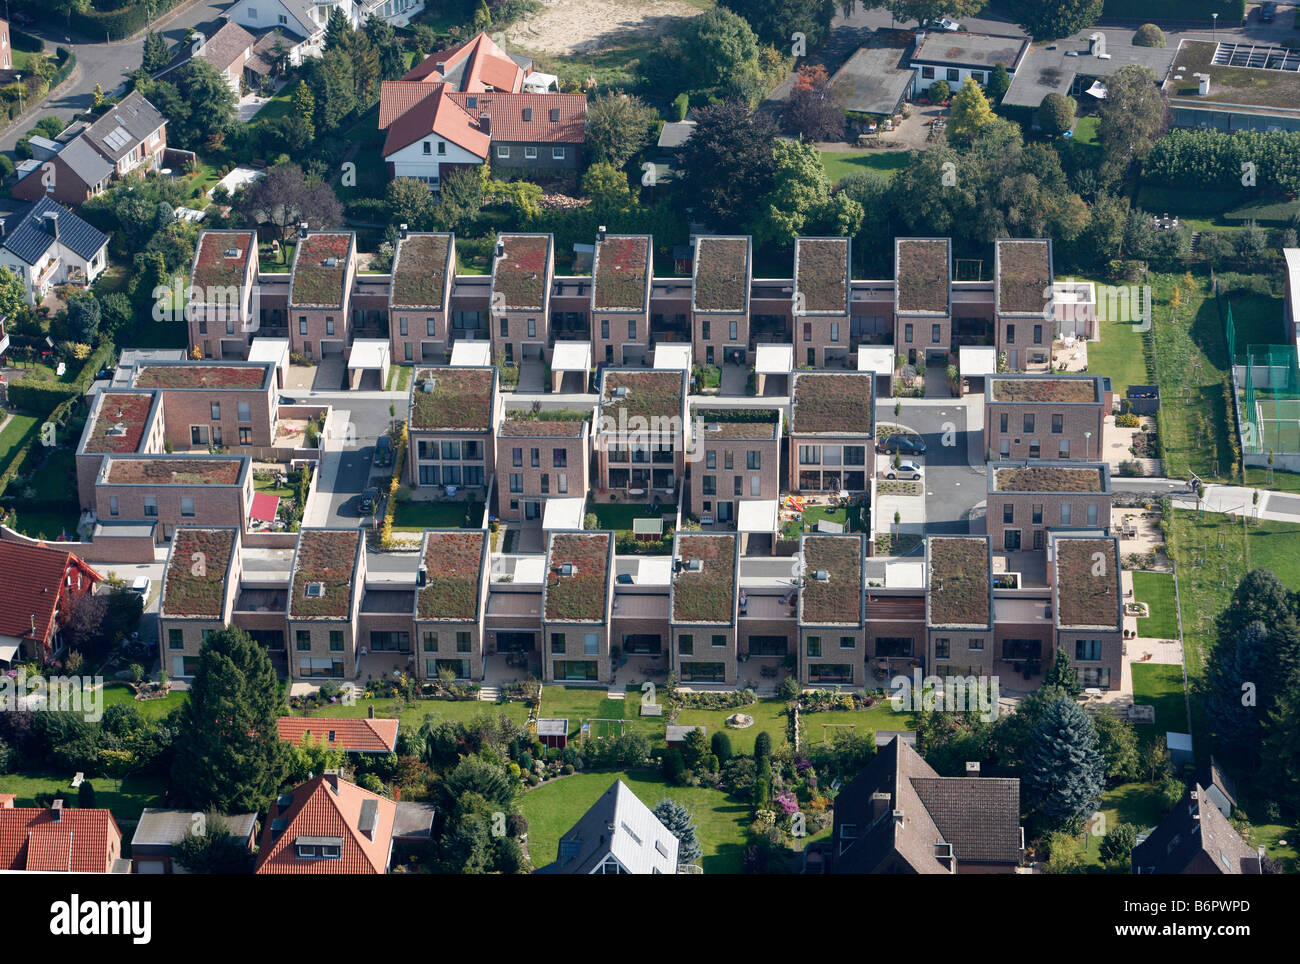 Private houses with garden roofs, Munster, Germany Stock Photo